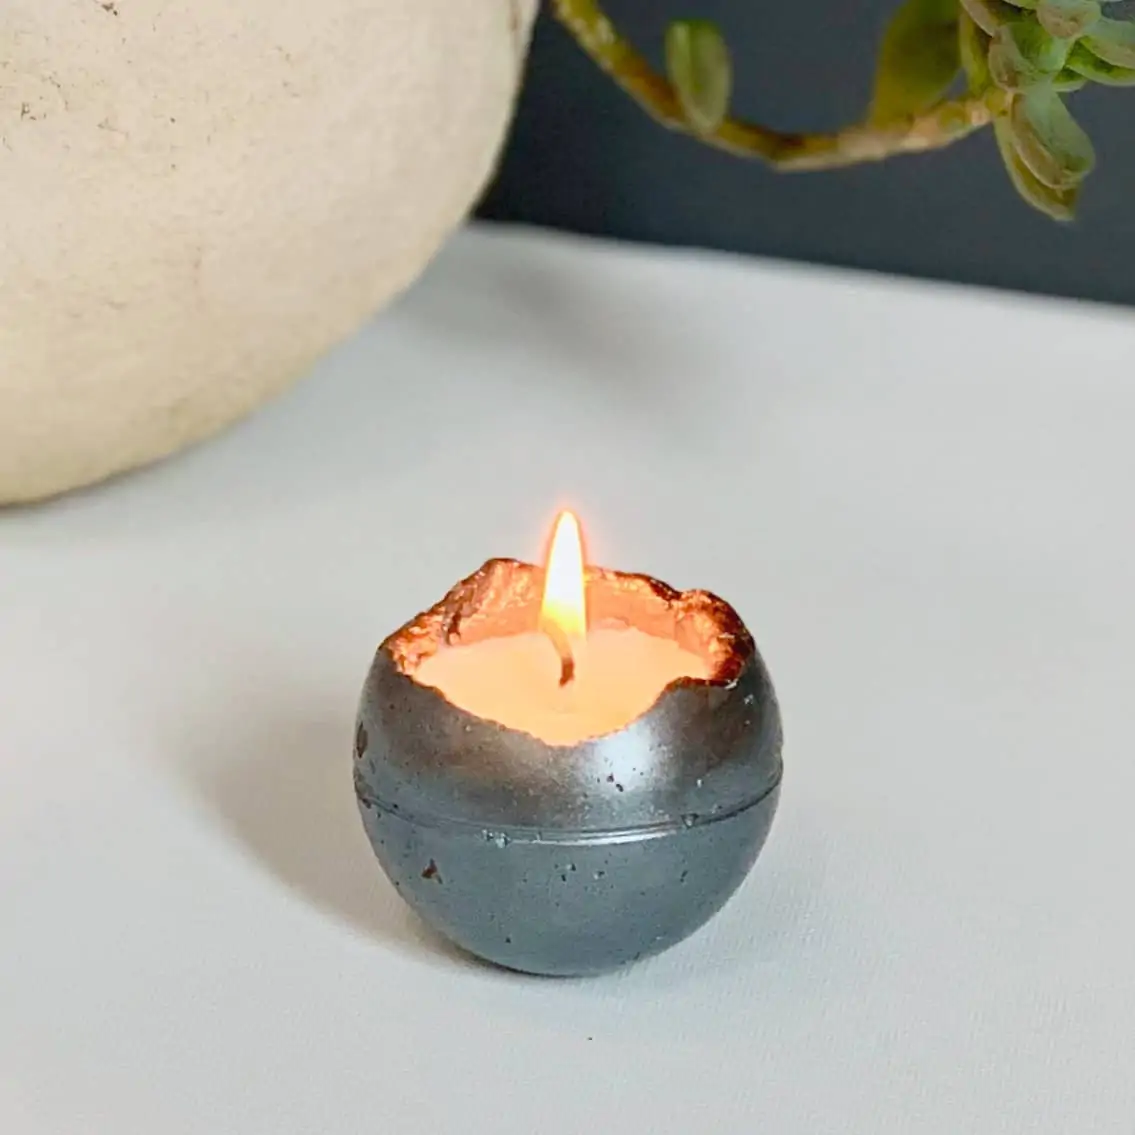 concrete candle- metallic blue and copper colored round candle made of concrete is lit on table